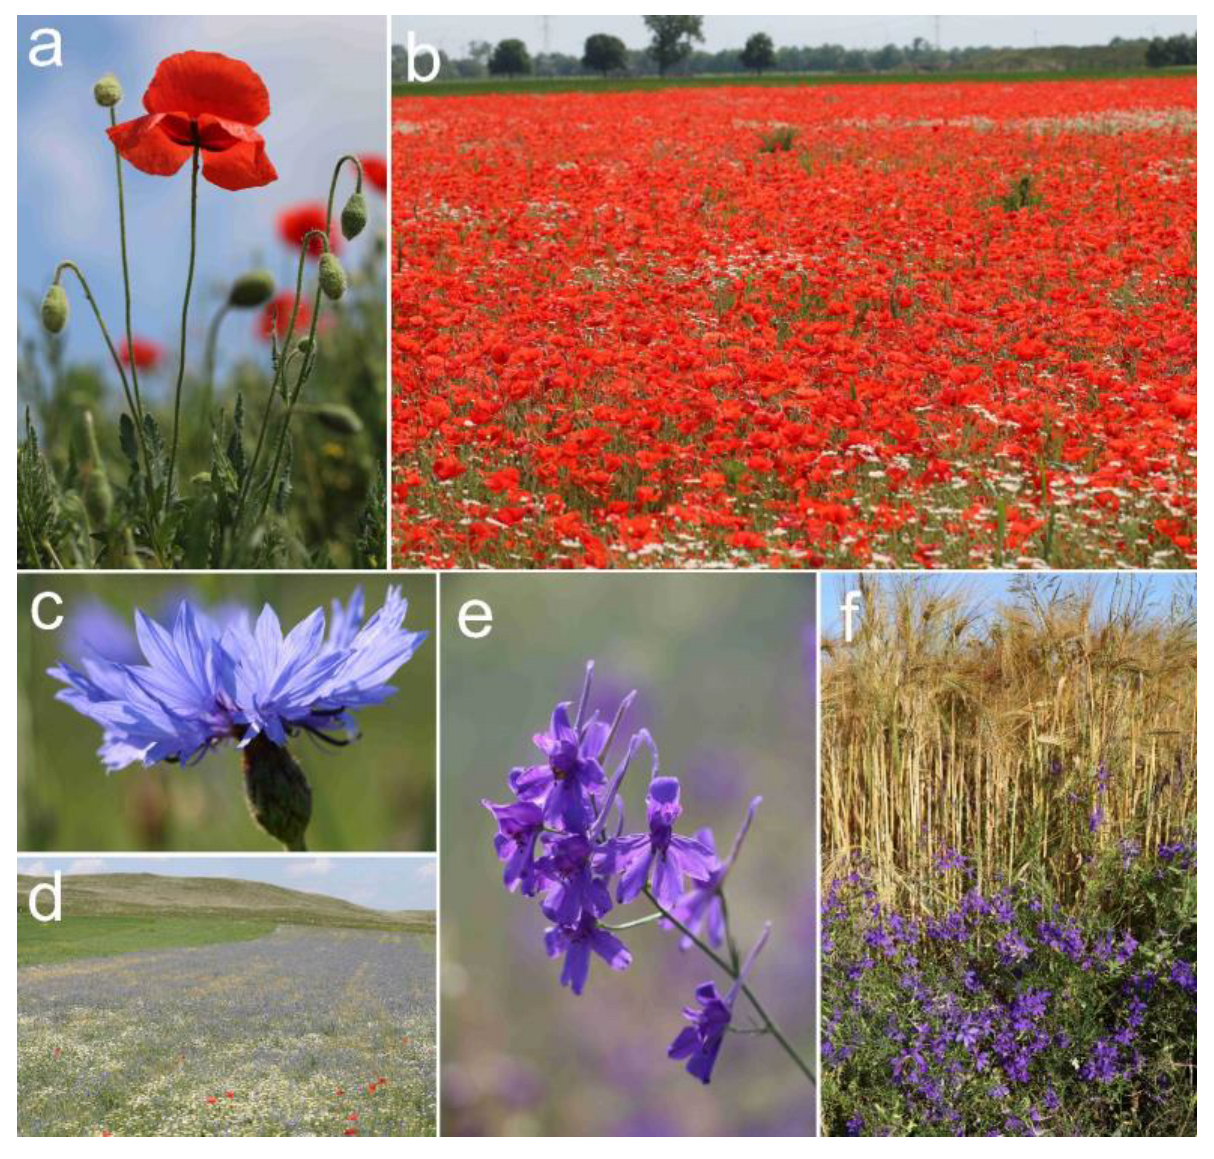 Plants Free Full-Text Iconic Arable Weeds The Significance of Corn Poppy (Papaver rhoeas), Cornflower (Centaurea cyanus), and Field Larkspur (Delphinium consolida) in Hungarian Ethnobotanical and Cultural Heritage image